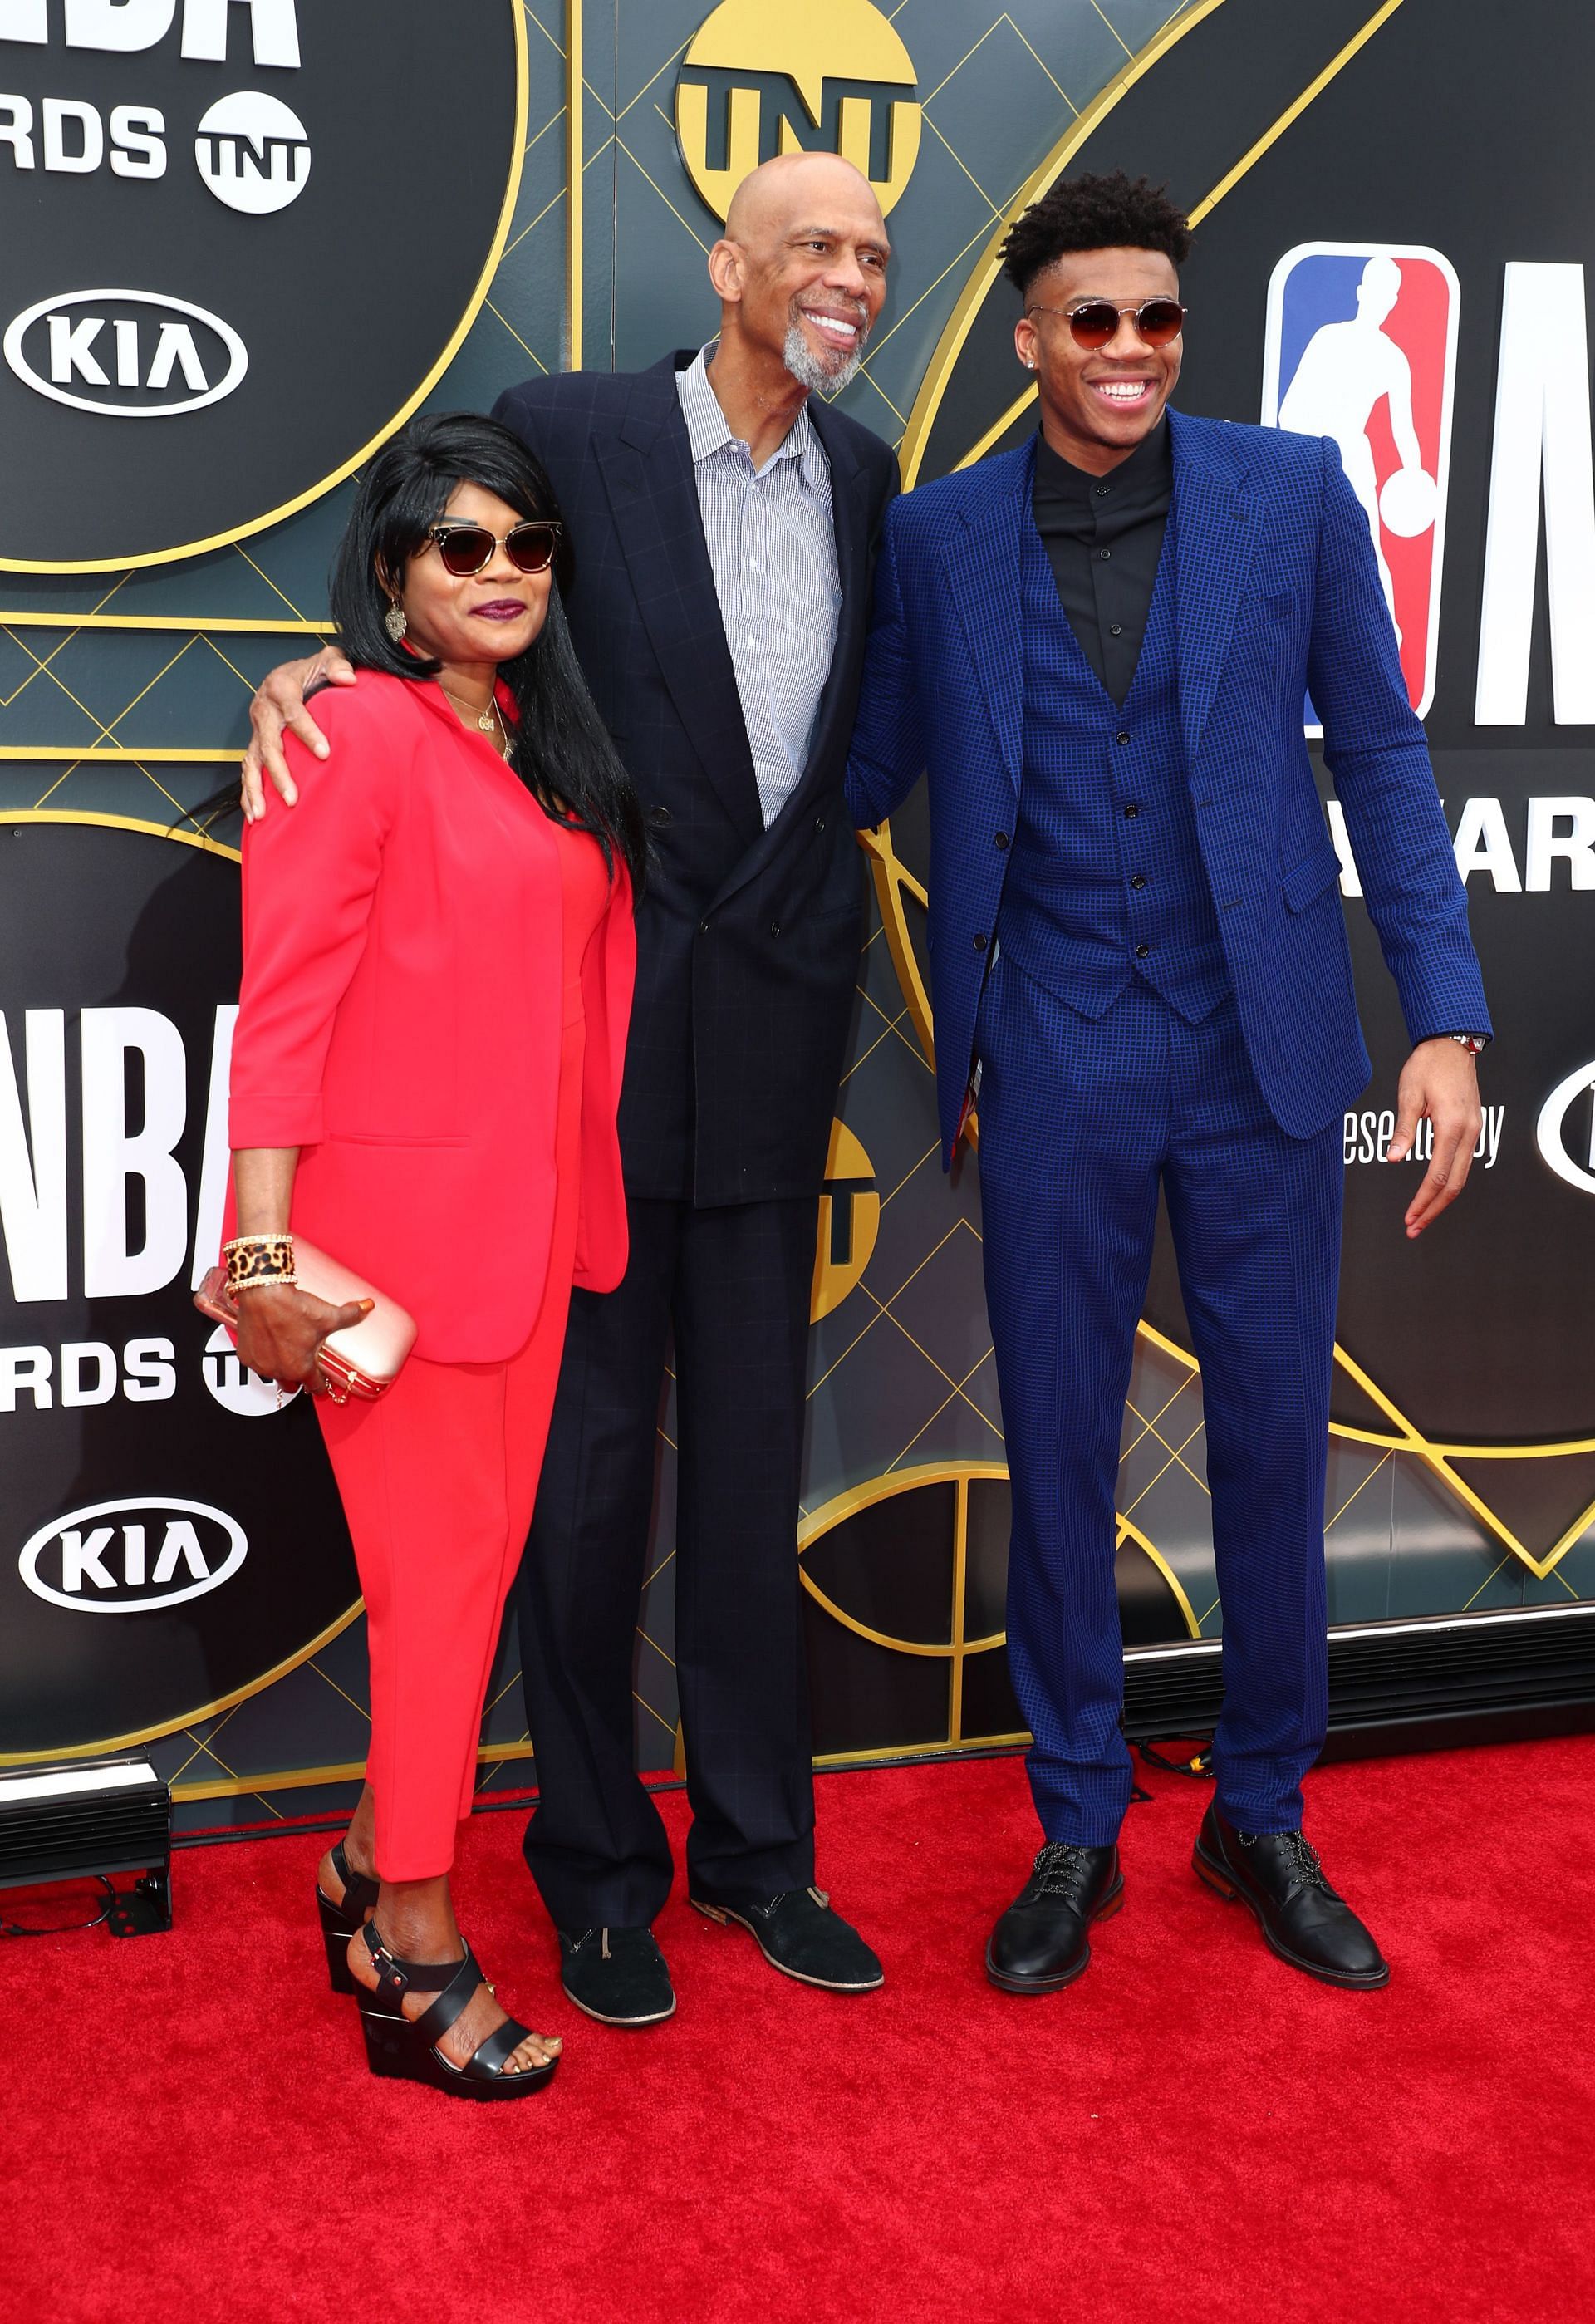 Veronica Antetokounmpo joins her son on one of the biggest days of his career.